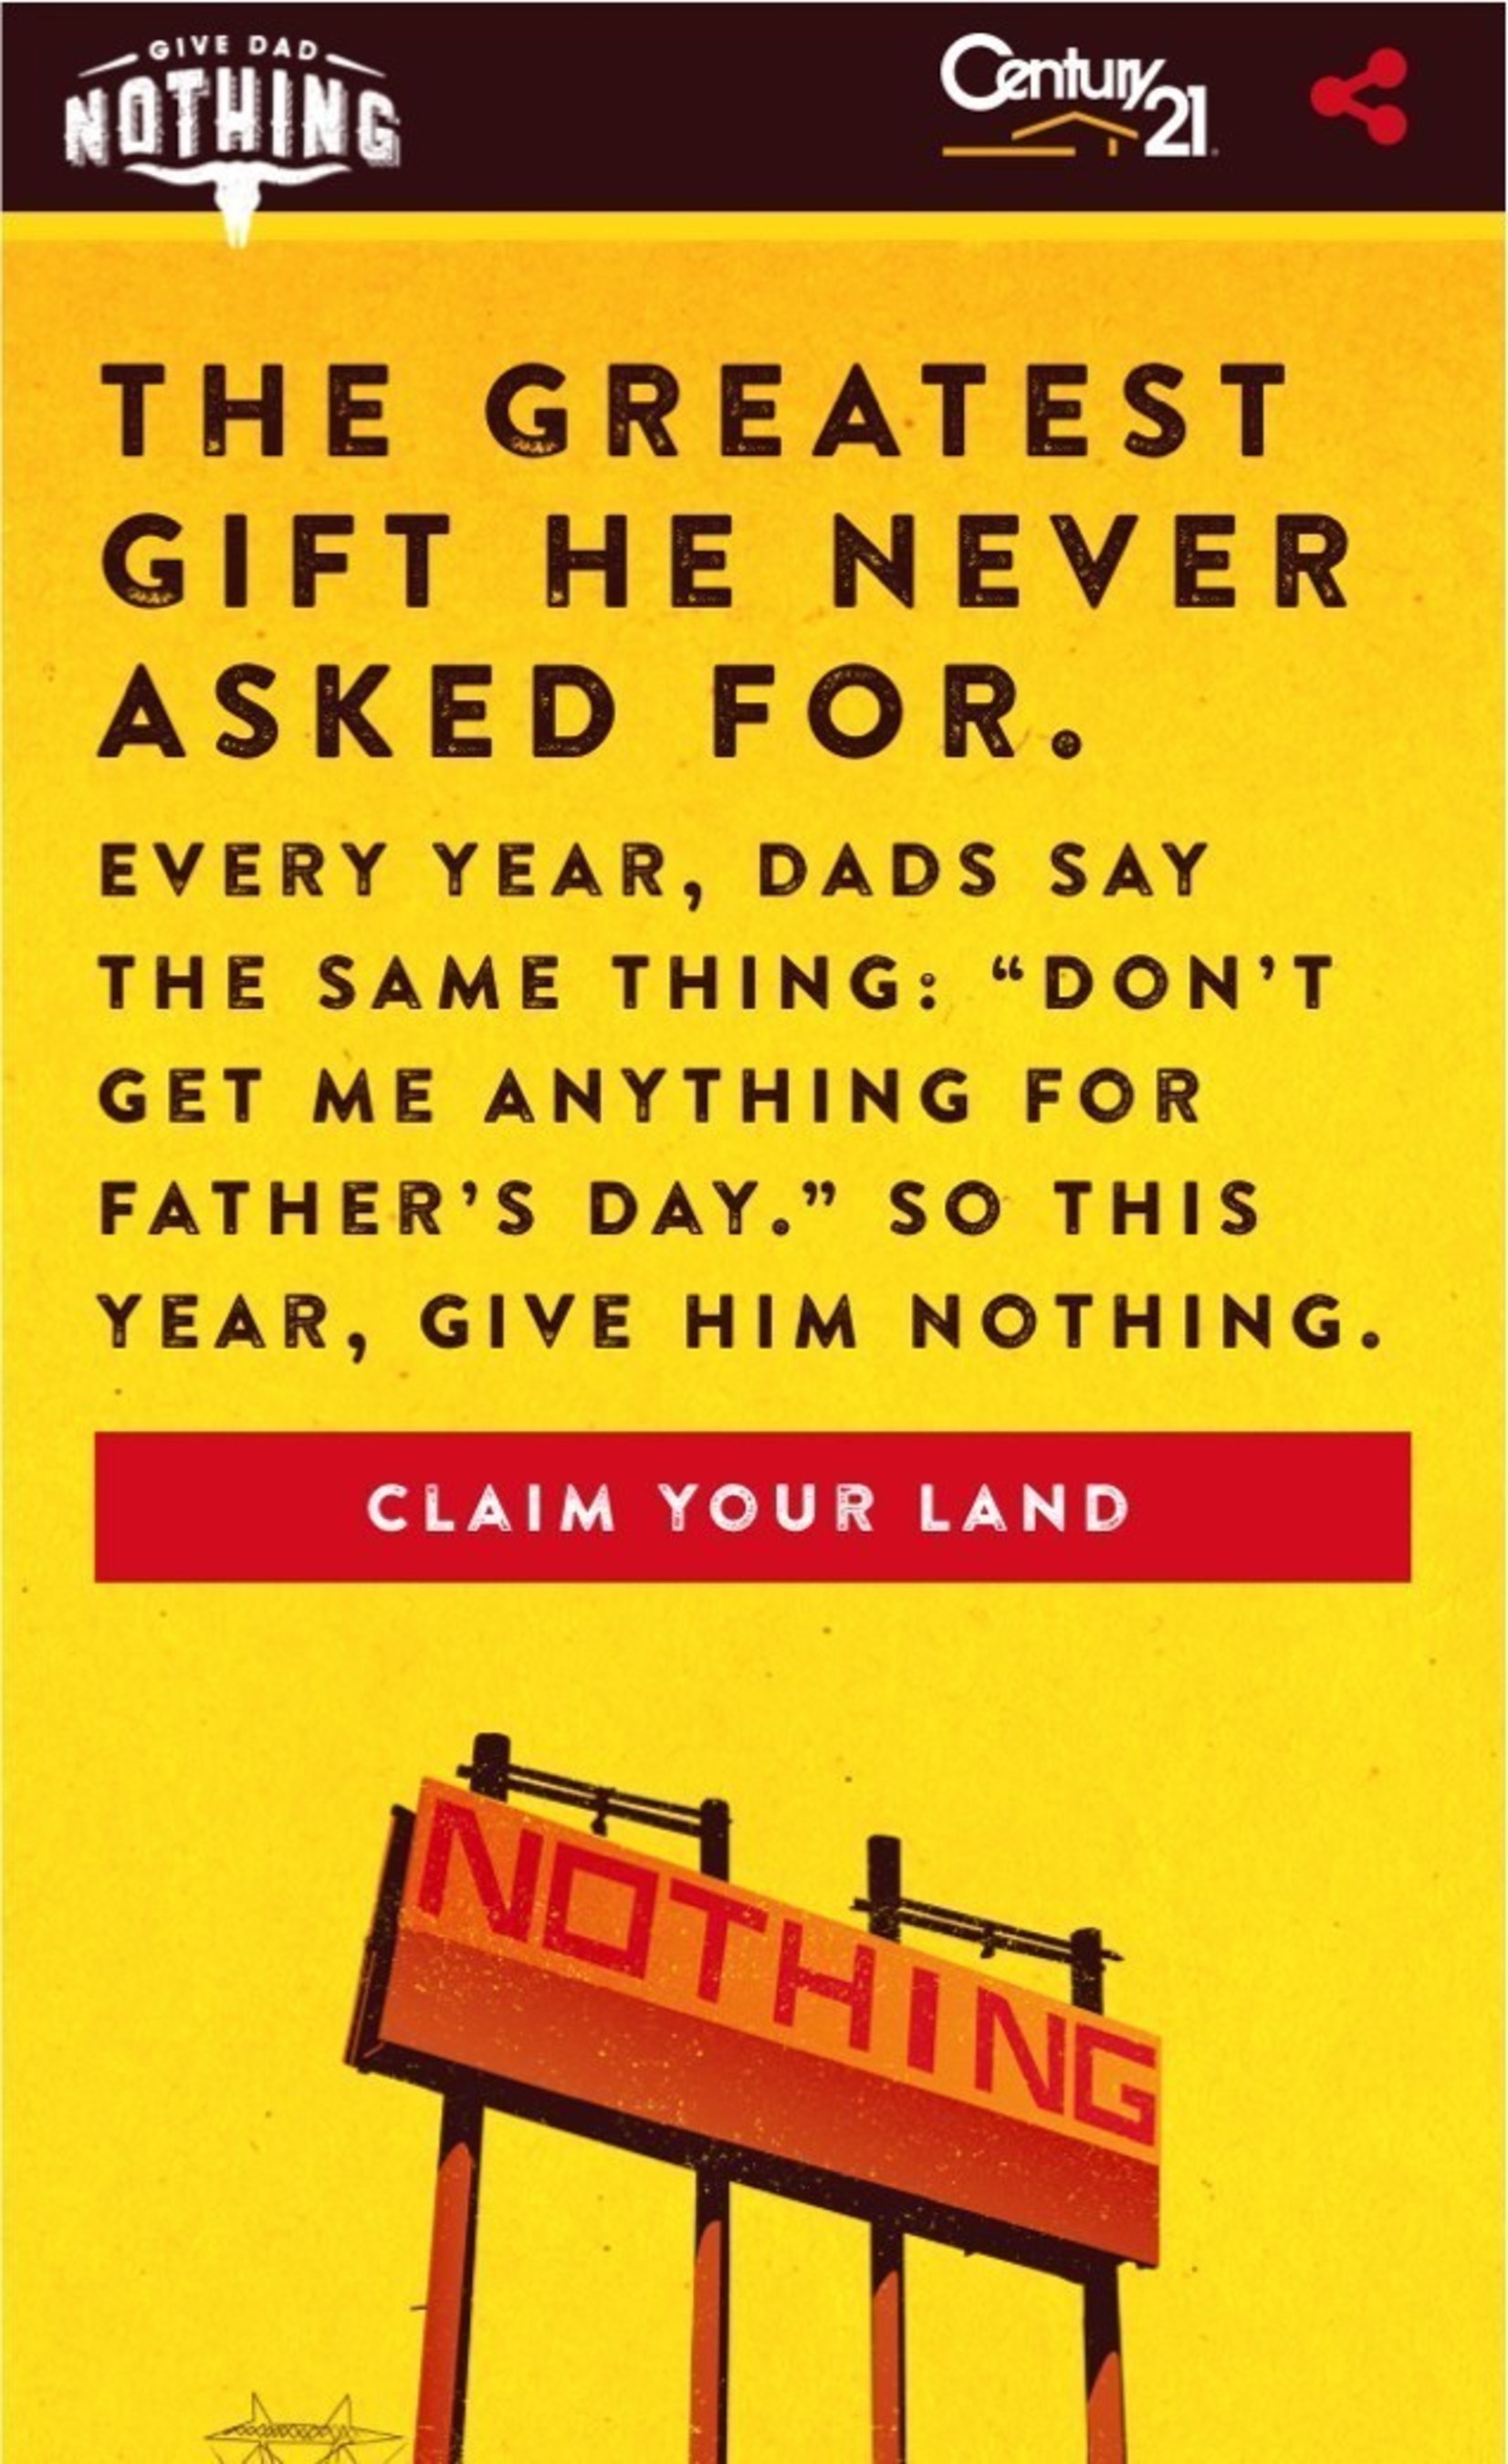 Give Dad Nothing Microsite